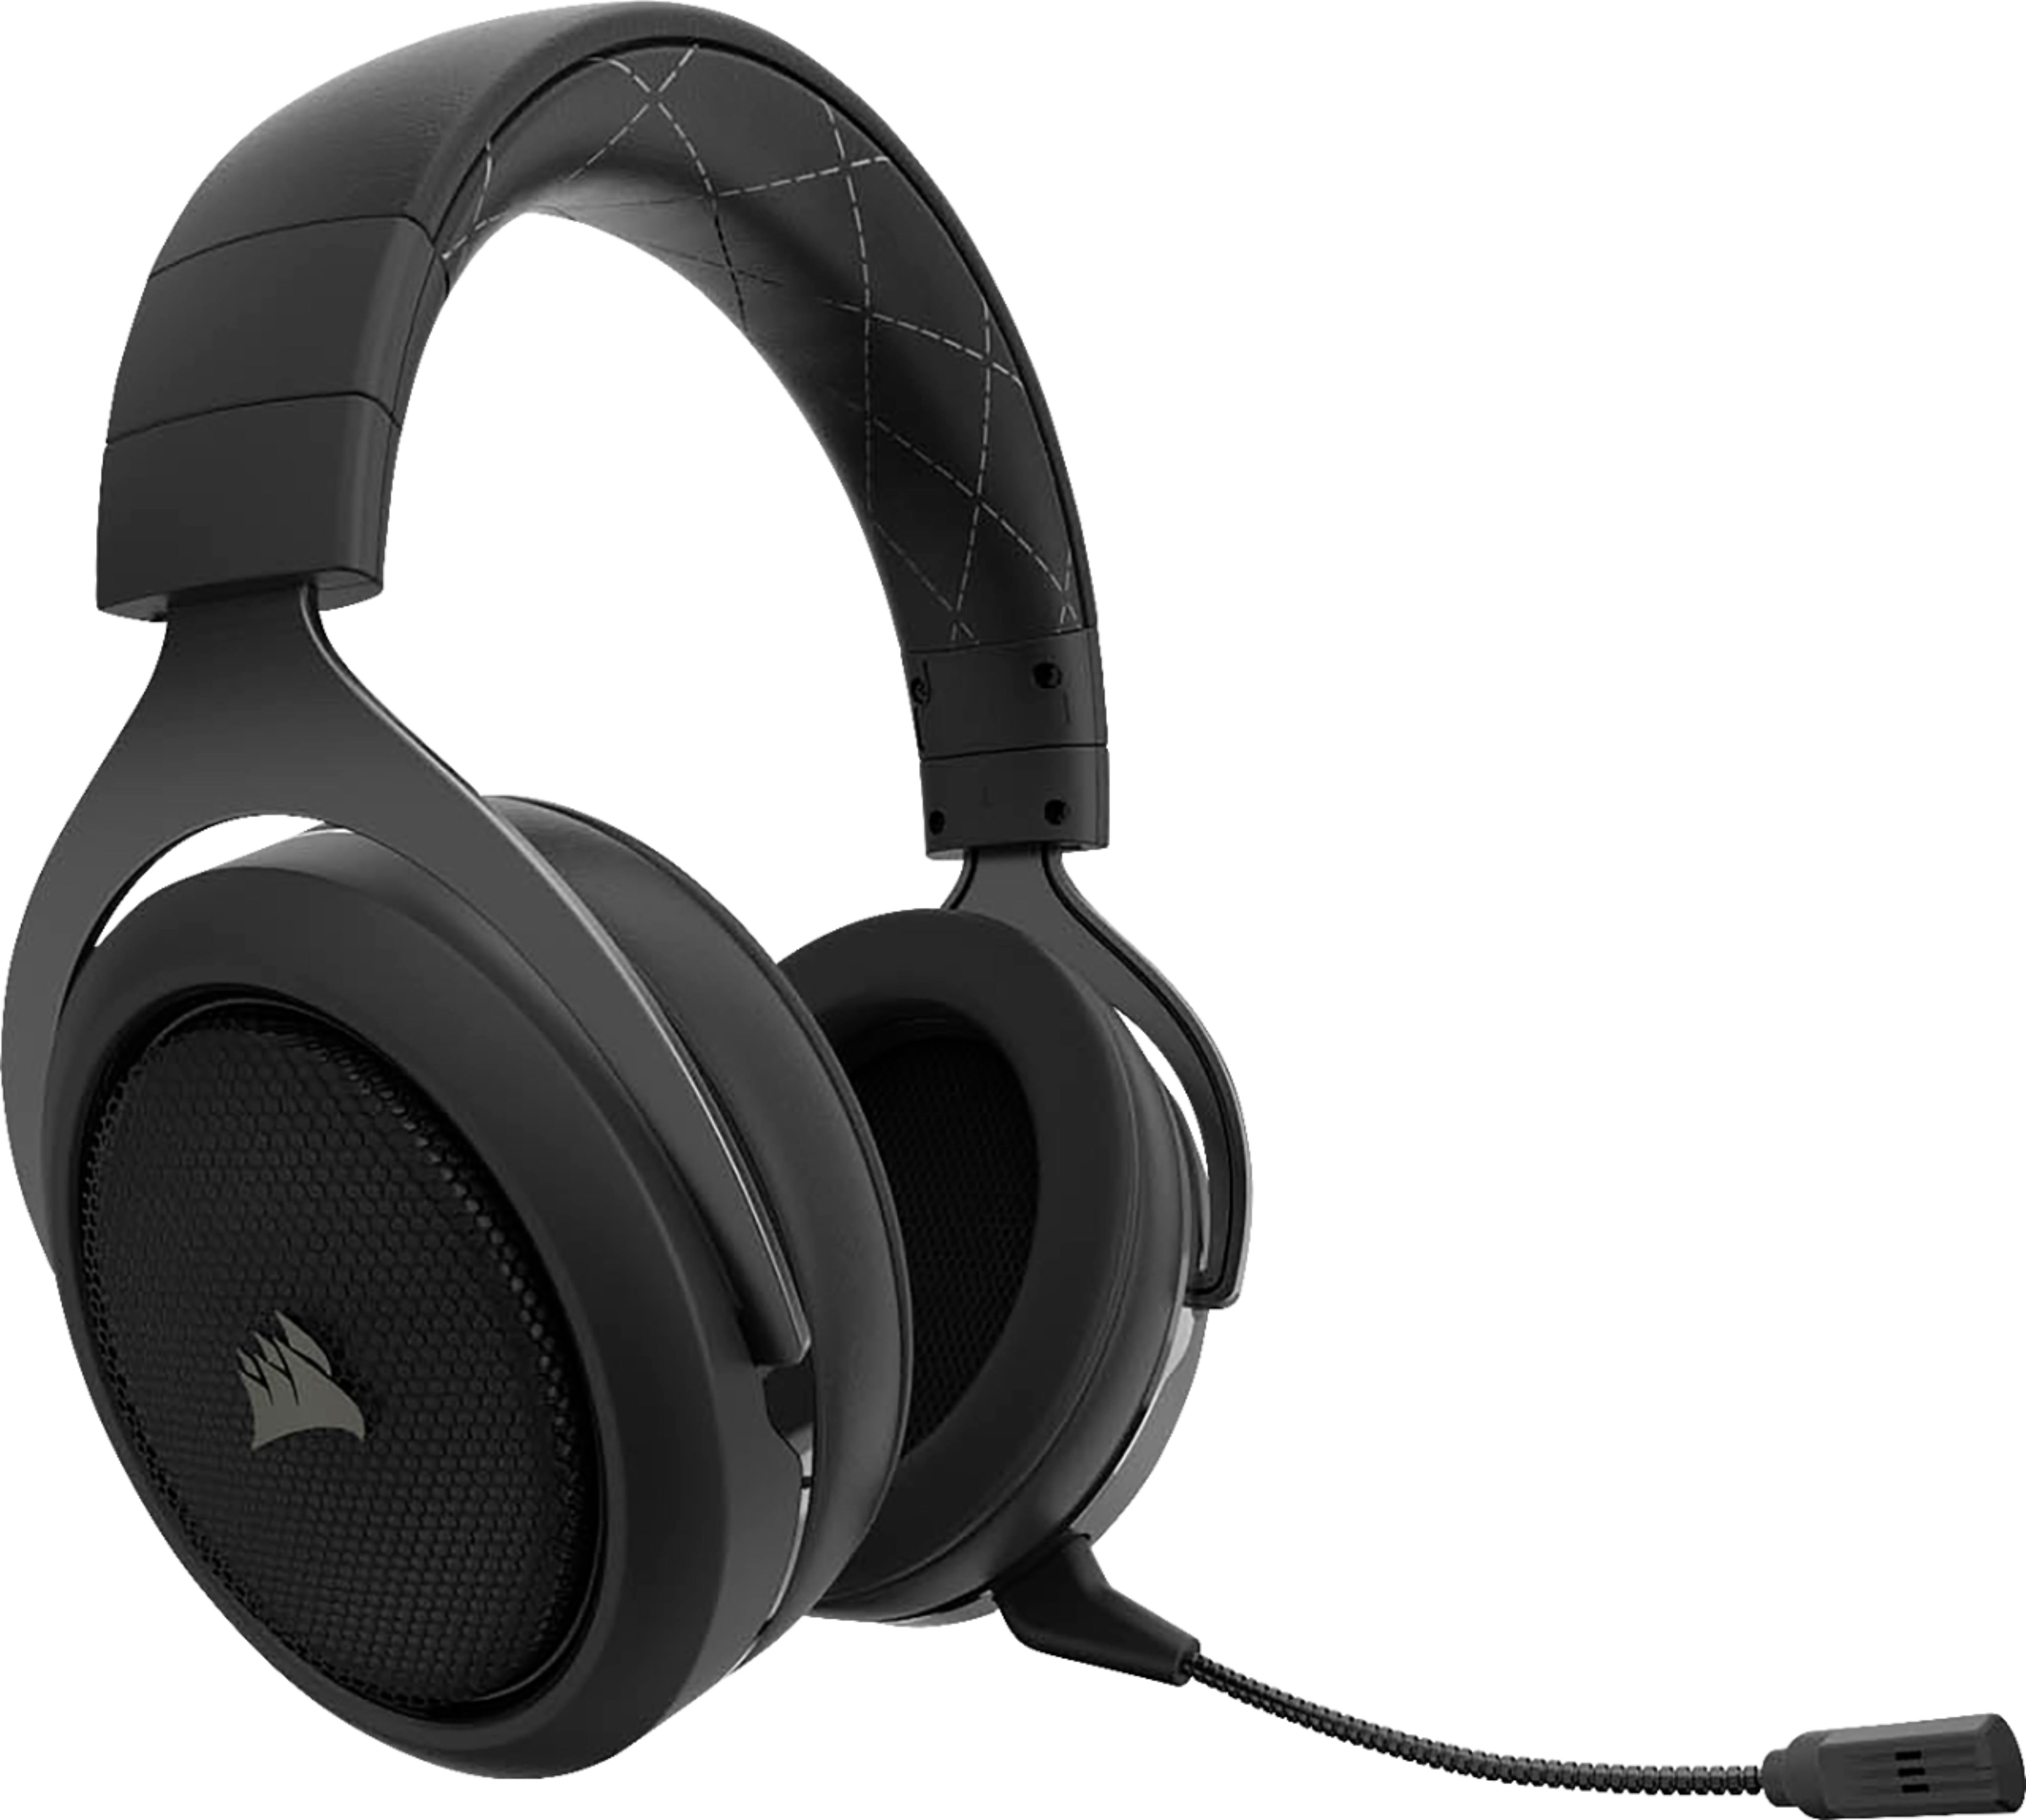 CORSAIR - HS70 Wireless 7.1 Surround Sound Gaming Headset for PC and PlayStation 4 - Carbon